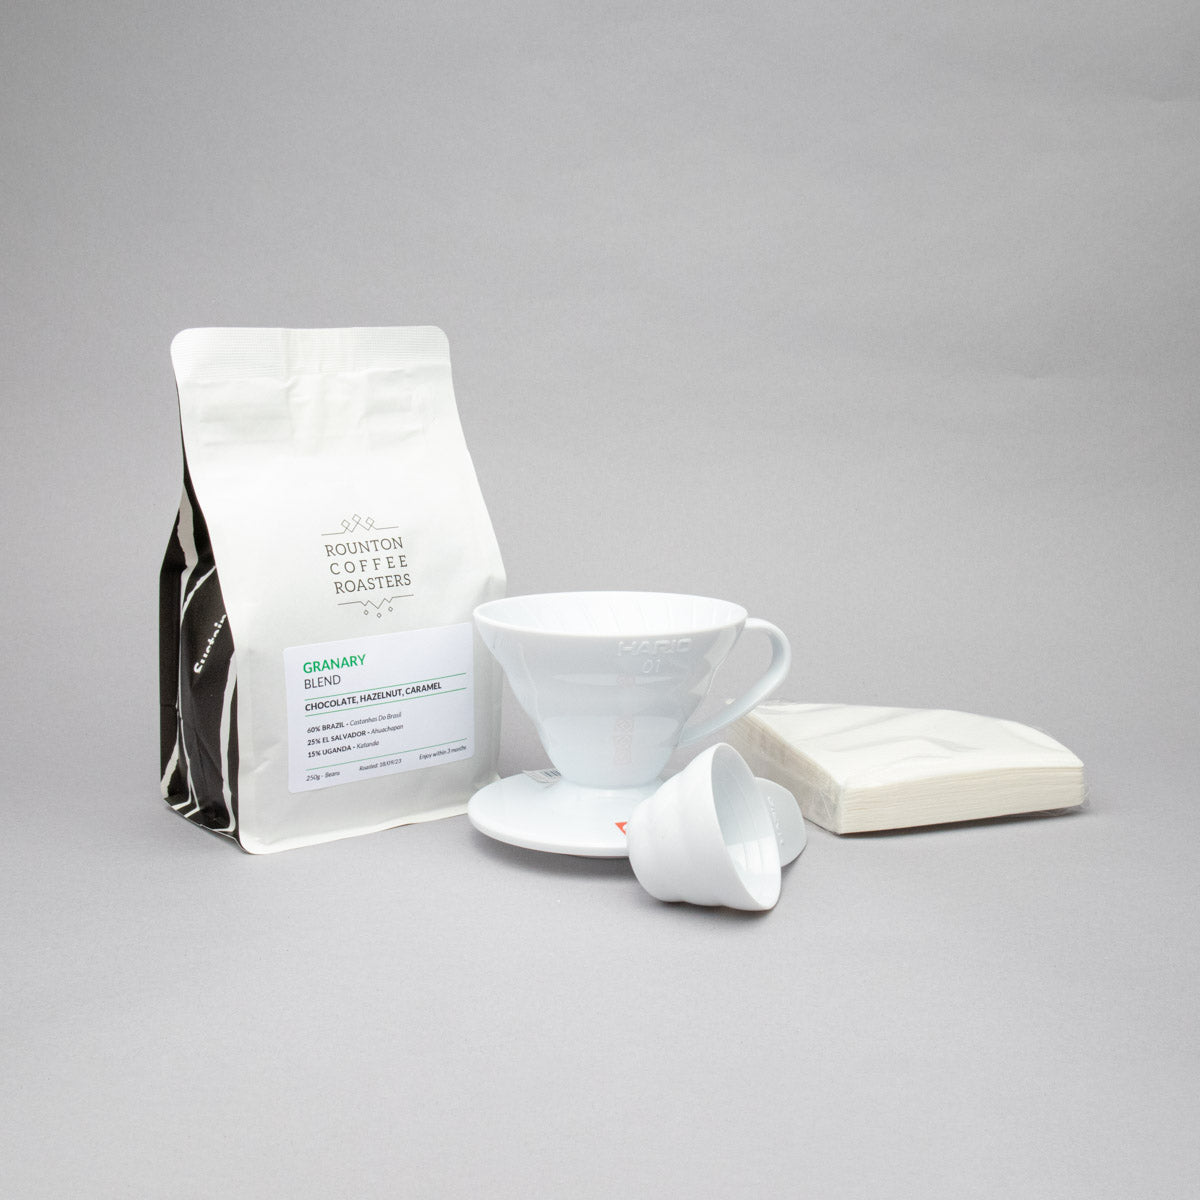 V60 Size 1 Gift Set: White V60 (Size 1), 40 pack of V60 Filters and a 250g Bag of Specialty Coffee Beans